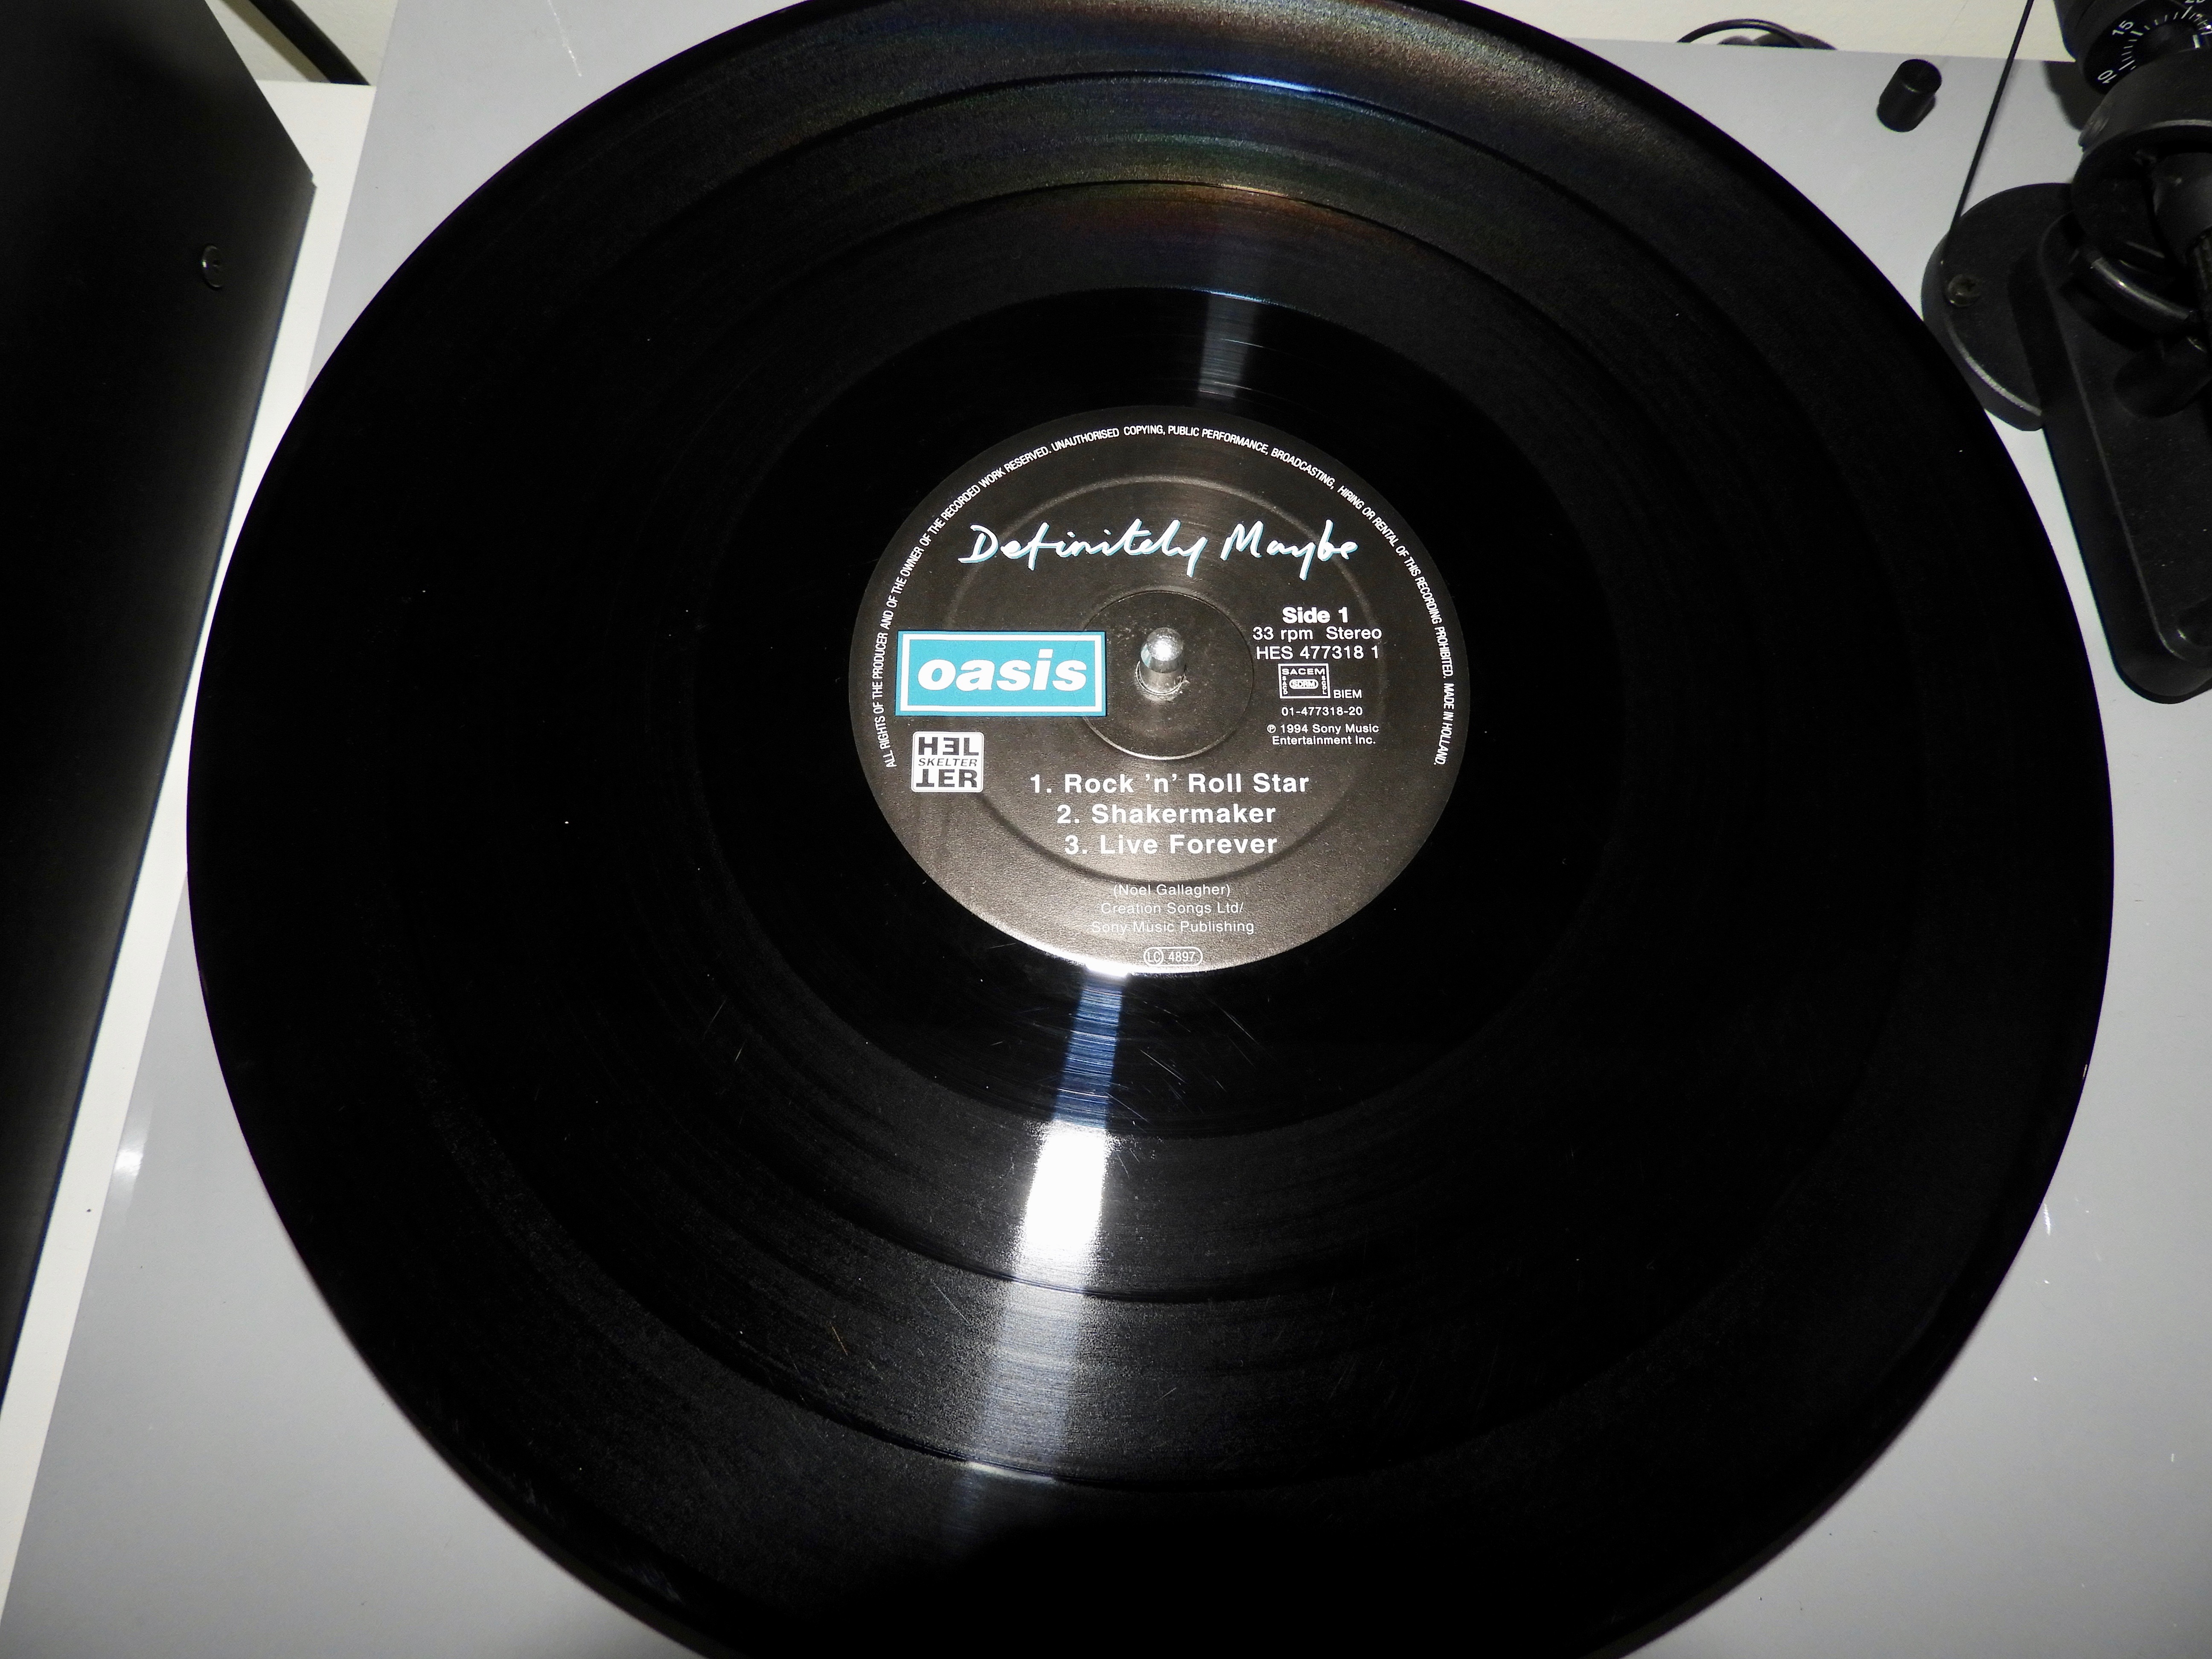 for mig der At redigere Vinyl love: Oasis “Definitely maybe” – My (life in) music lists